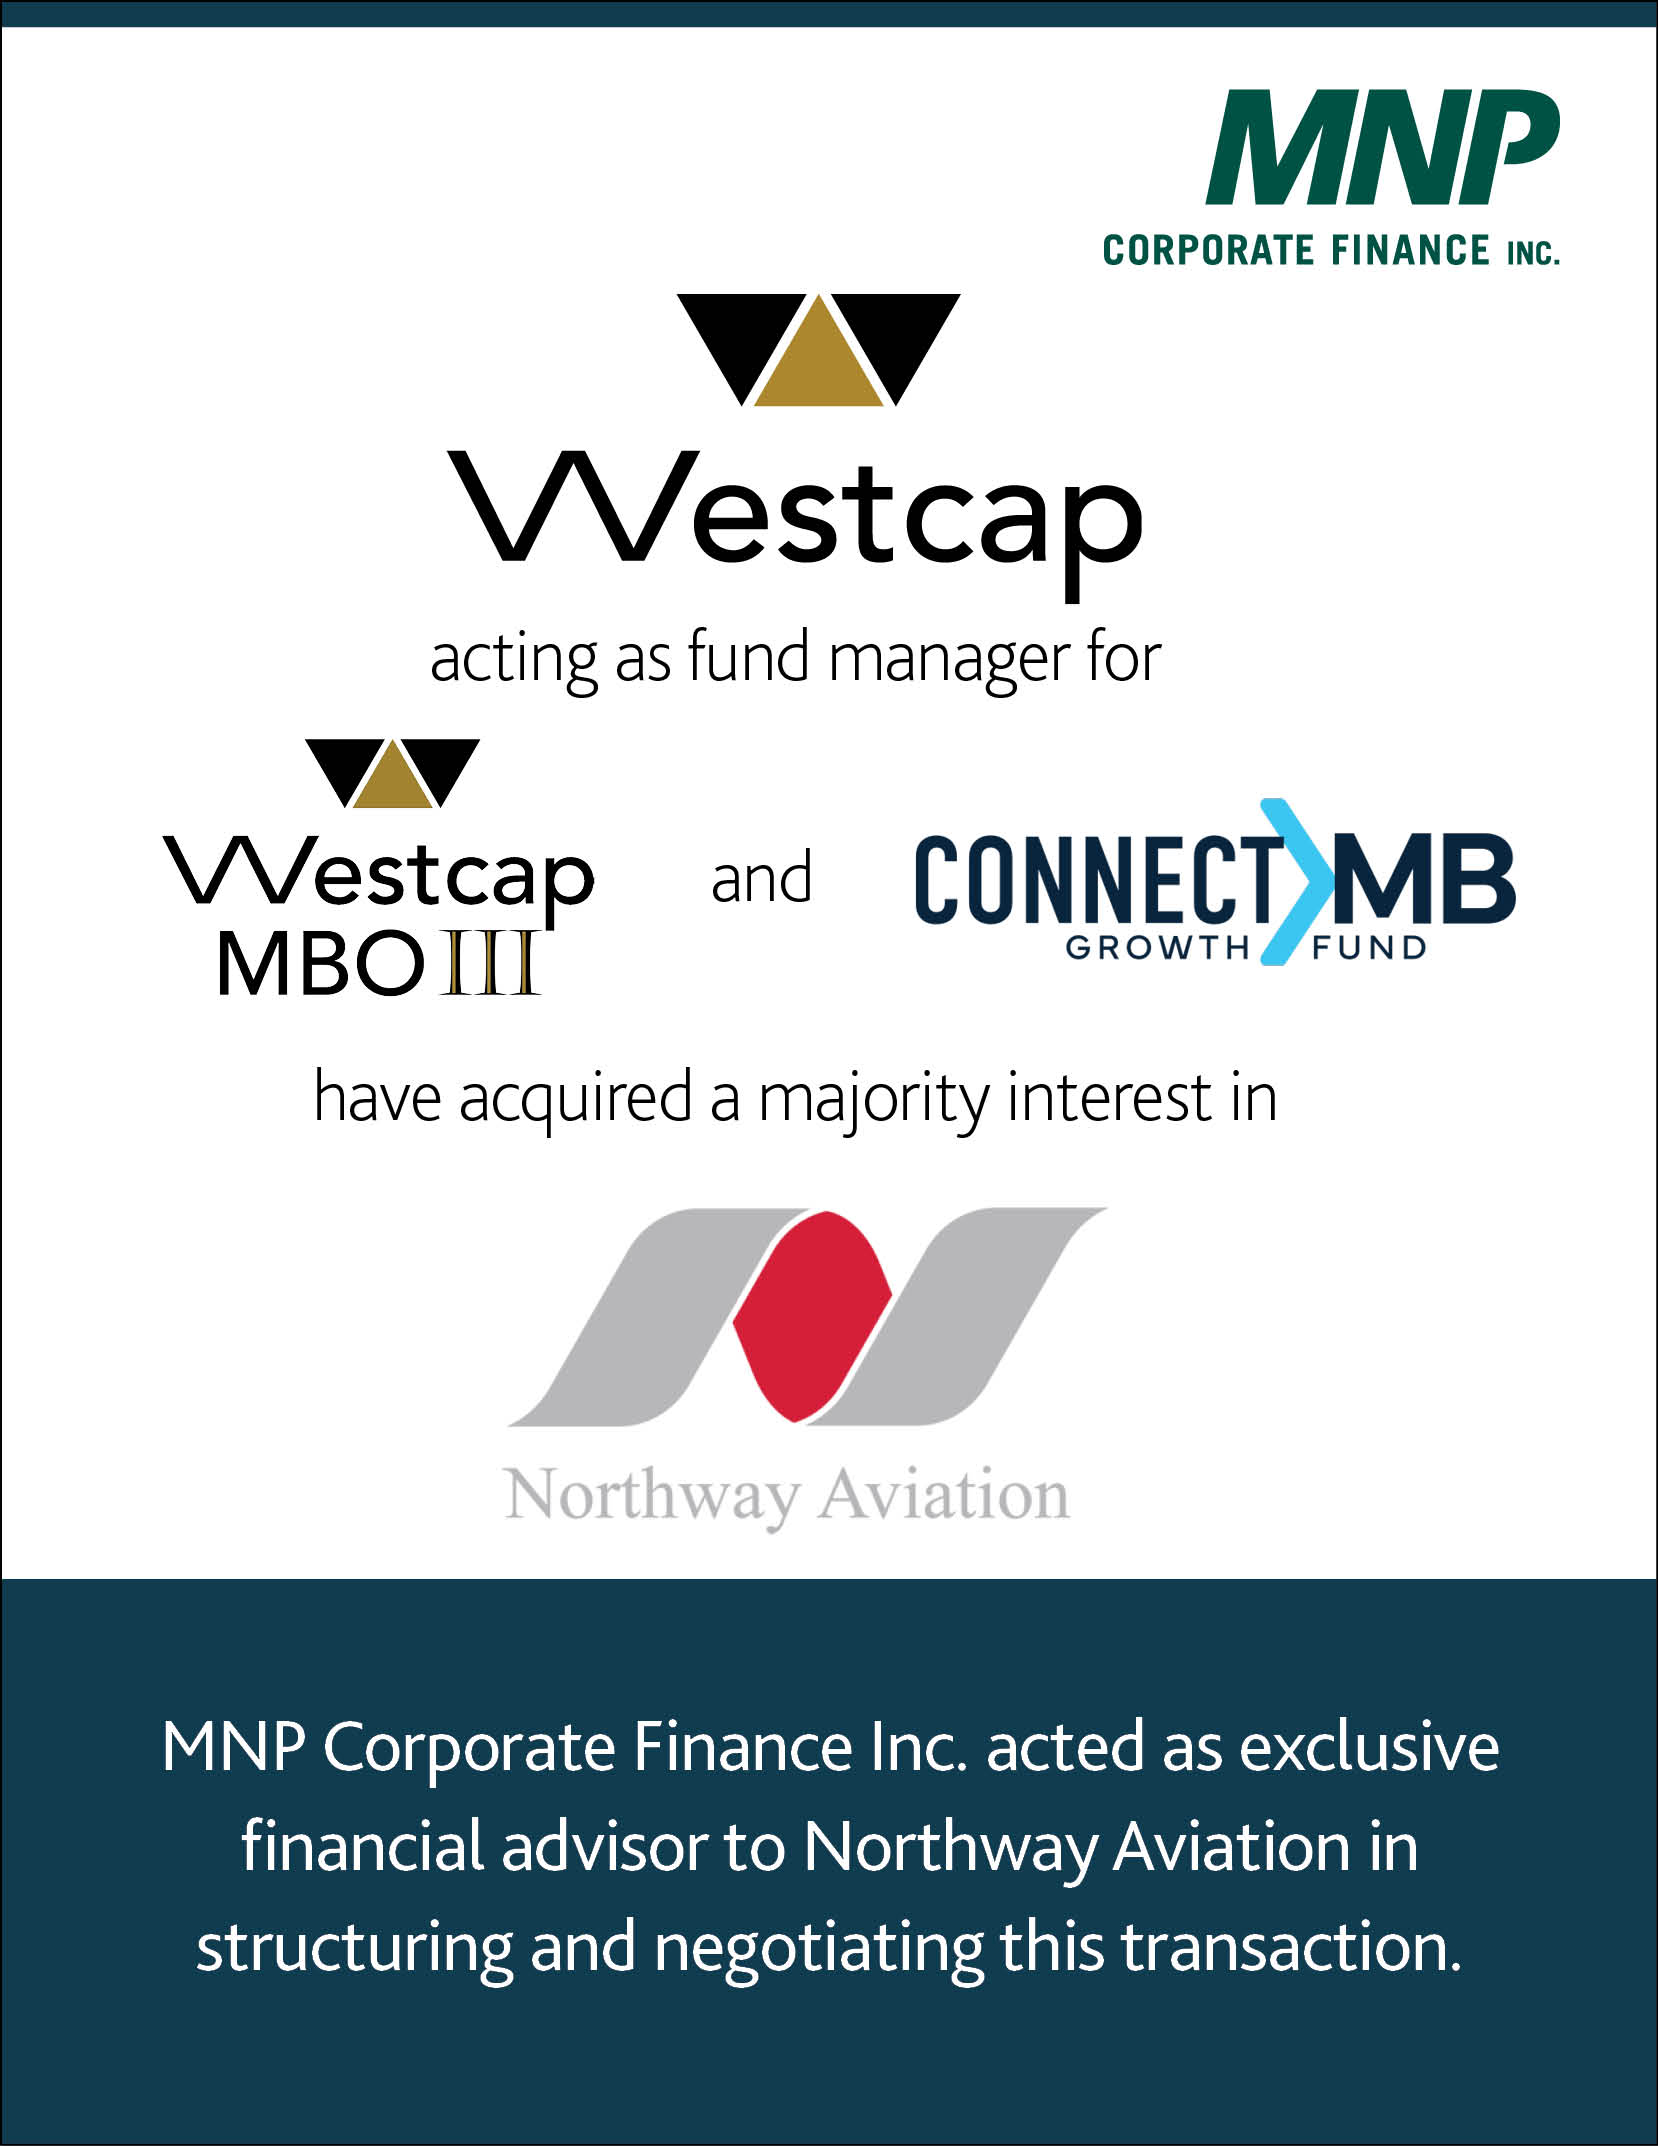 Westcap acting as fund manager for Westcap MBO III and Connect MB have acquired a majority of interest in Northway Aviation.